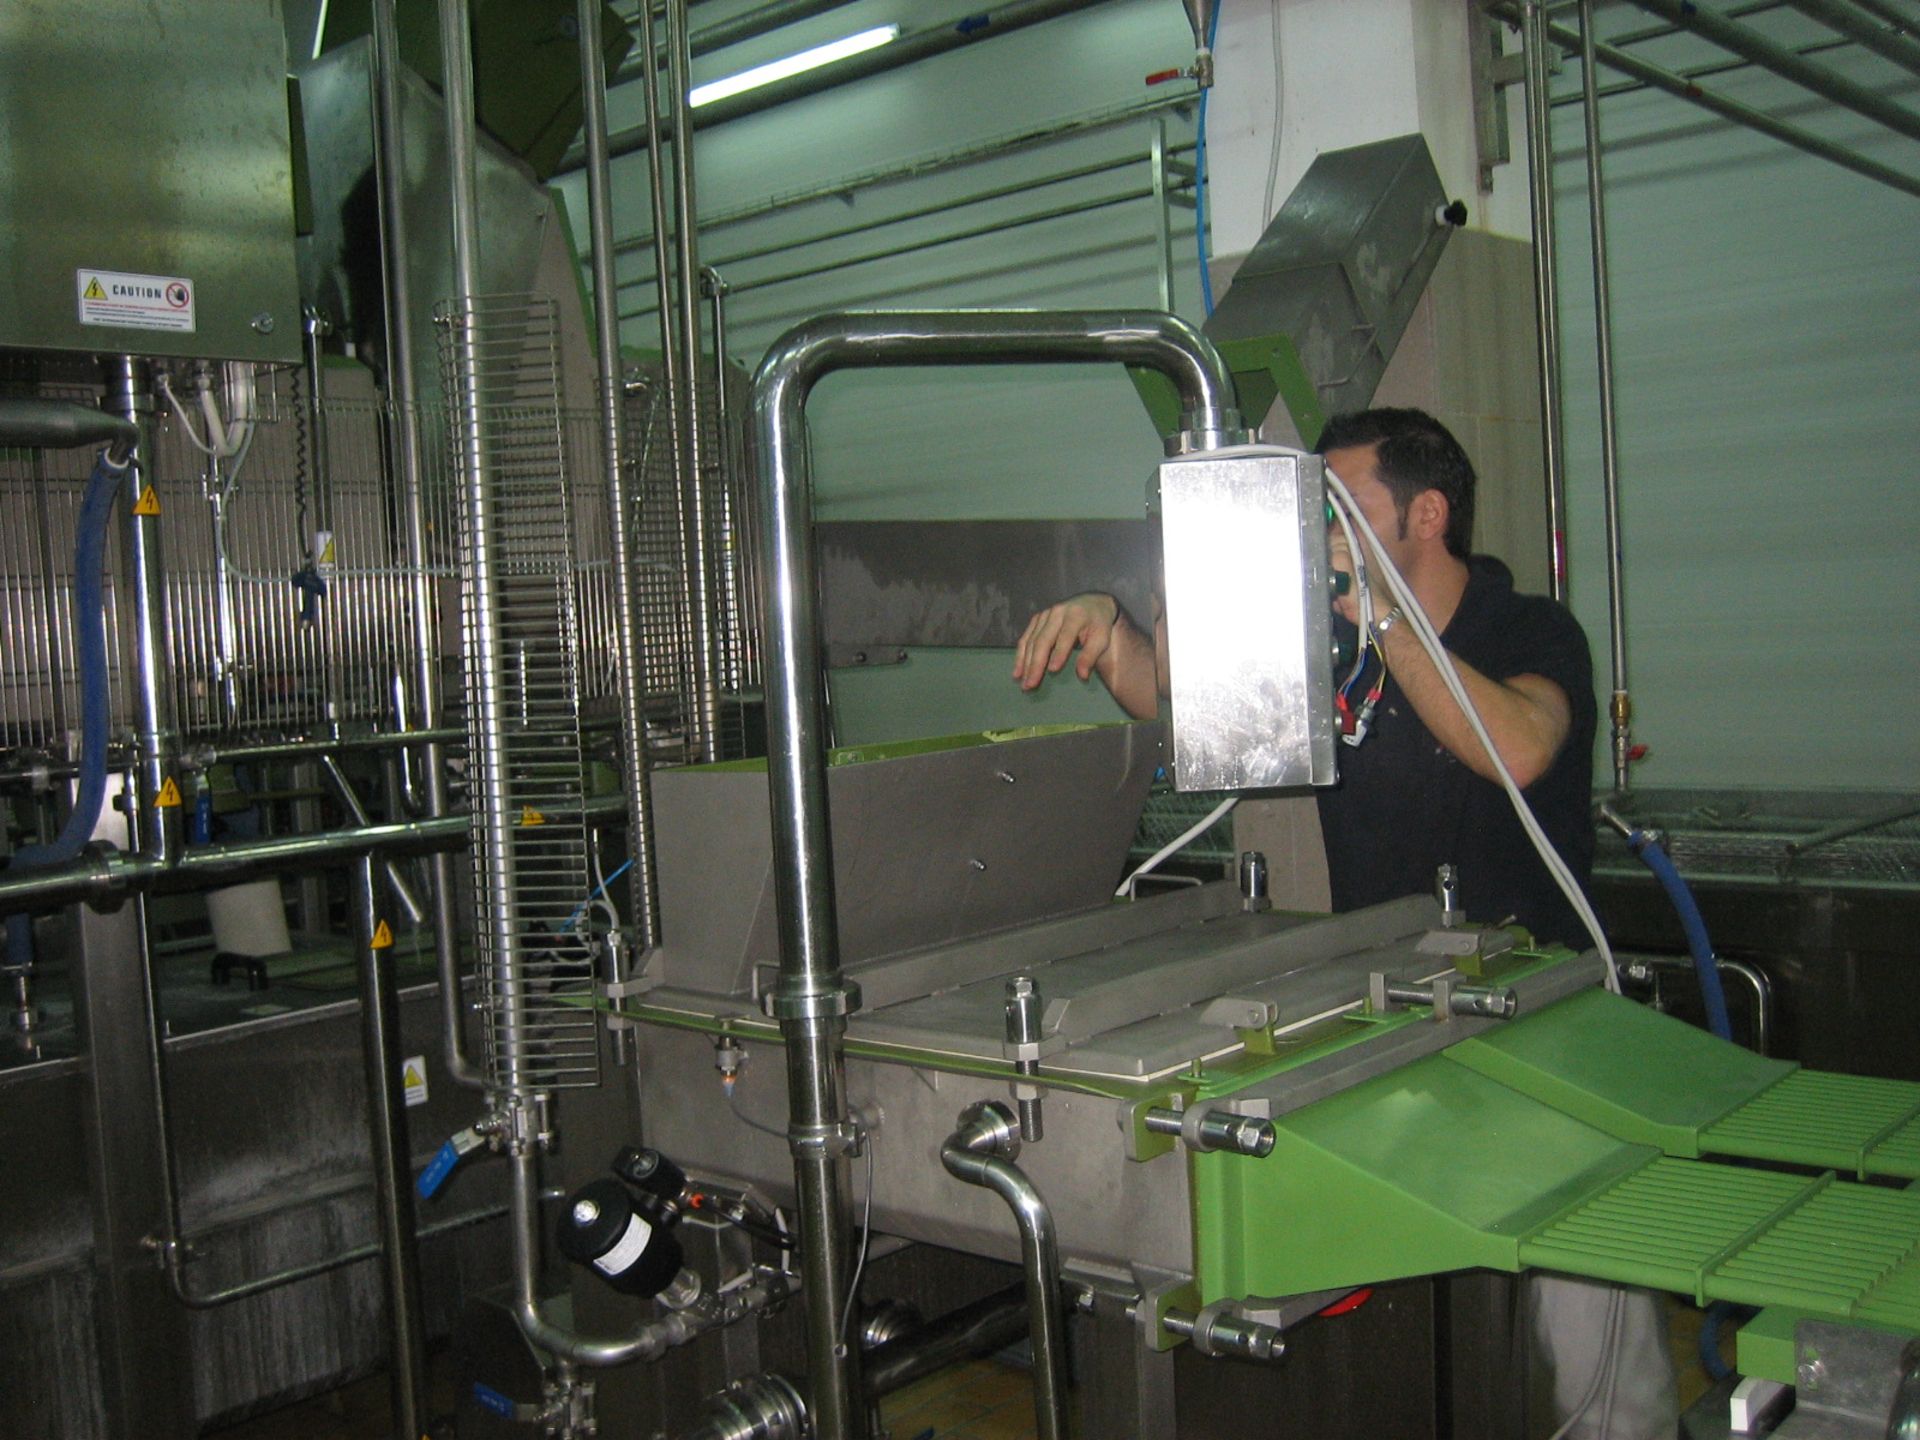 2X COMAT PROCESSING LINES FOR MOZZARELLA CHEESE TO PRODUCE MOZZARELLA STICKS AND MOZZARELLA BLOCKS - Image 8 of 10